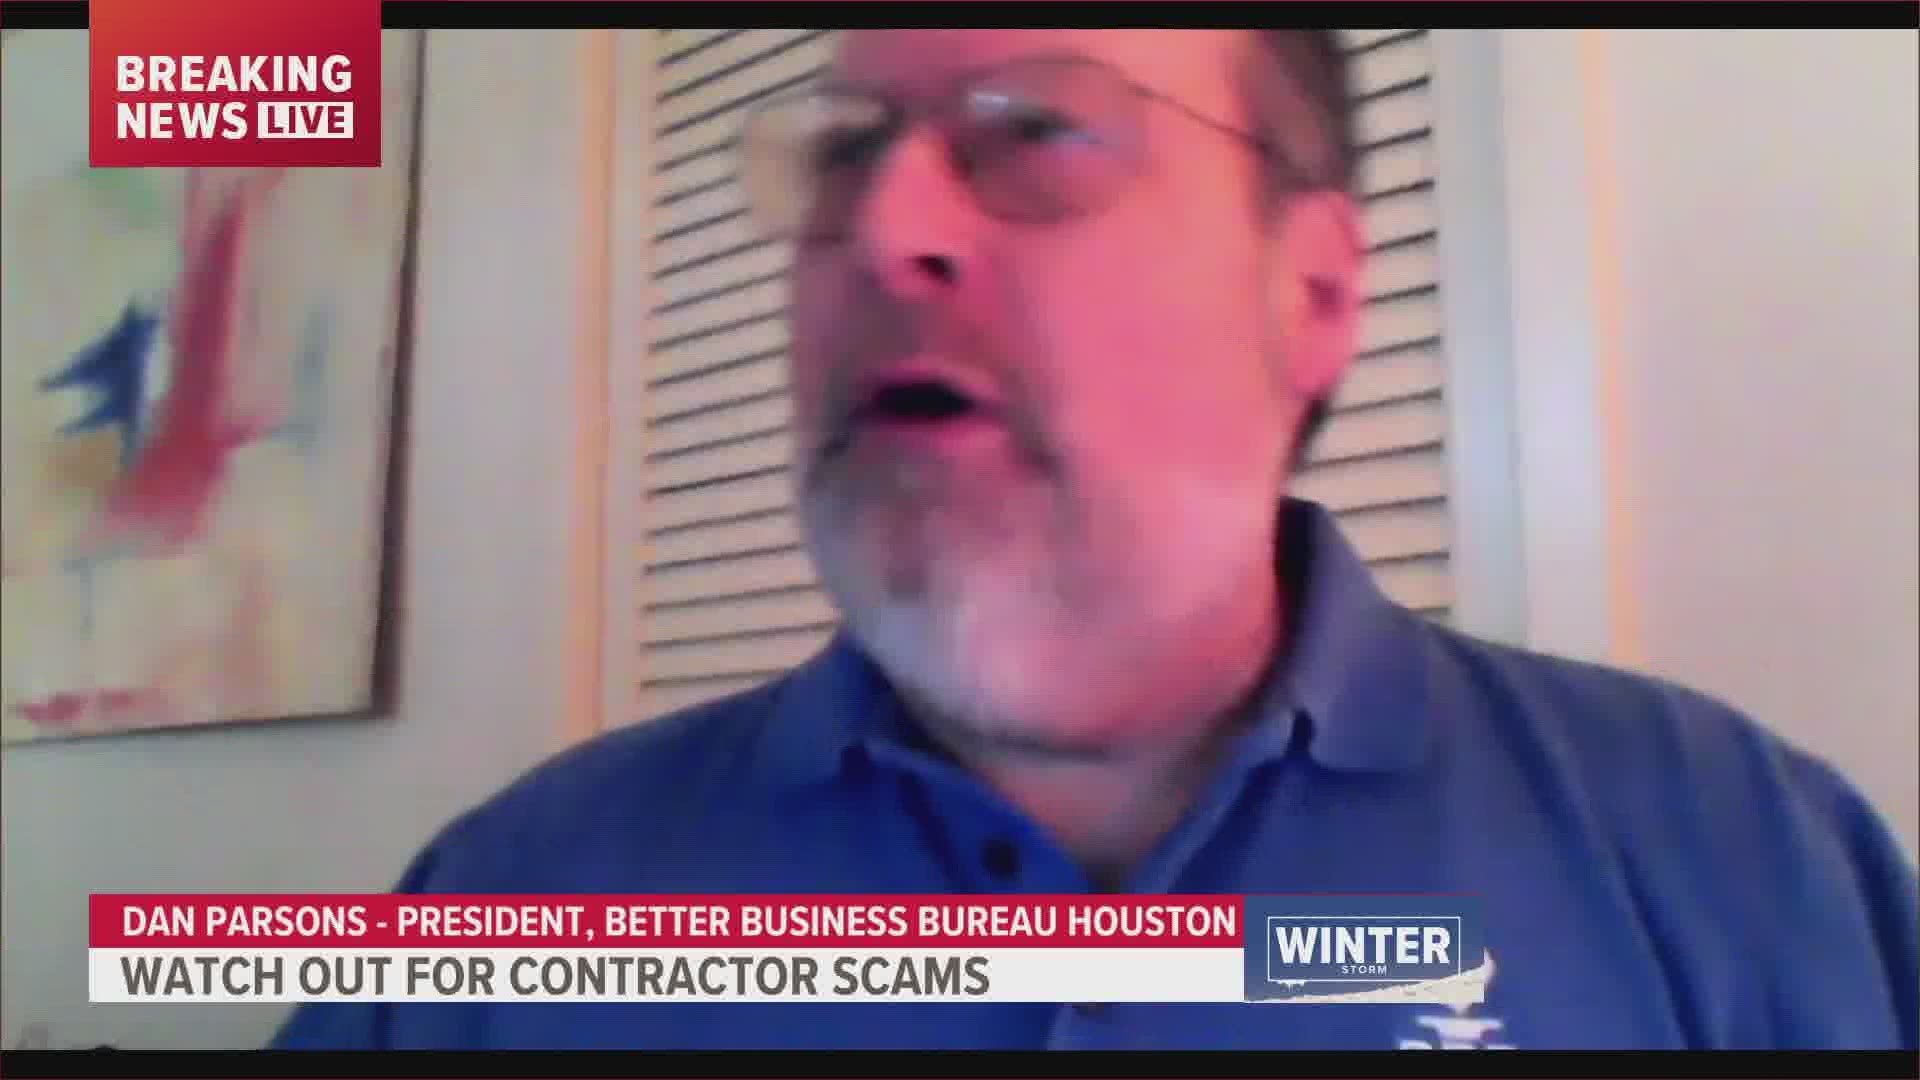 Dan Parsons, president of the Better Business Bureau-Houston, shares tips on how to not get scammed by contractors.